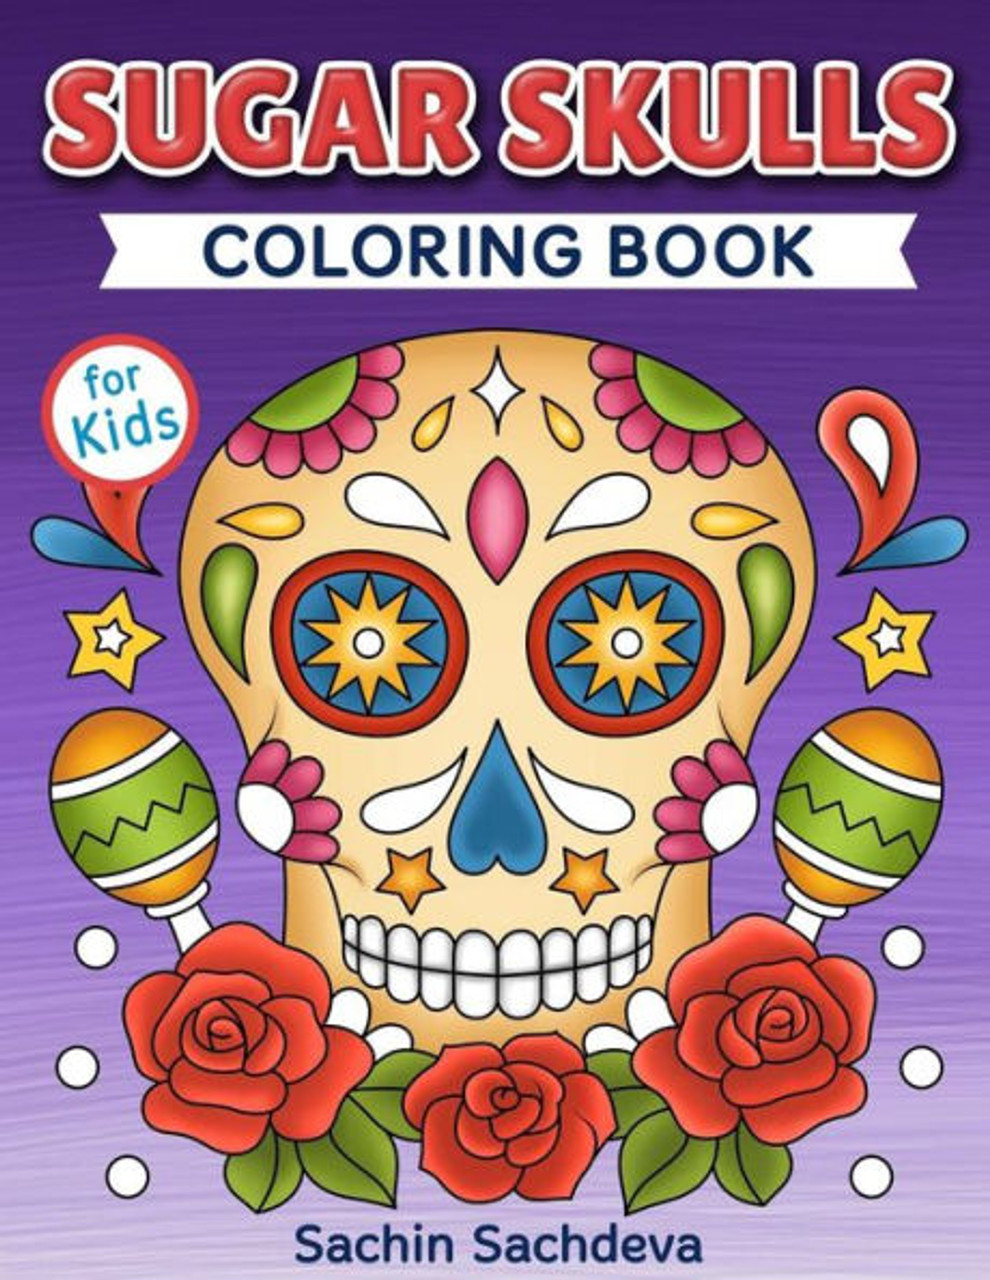 Sugar skulls coloring book for kids day of the dead